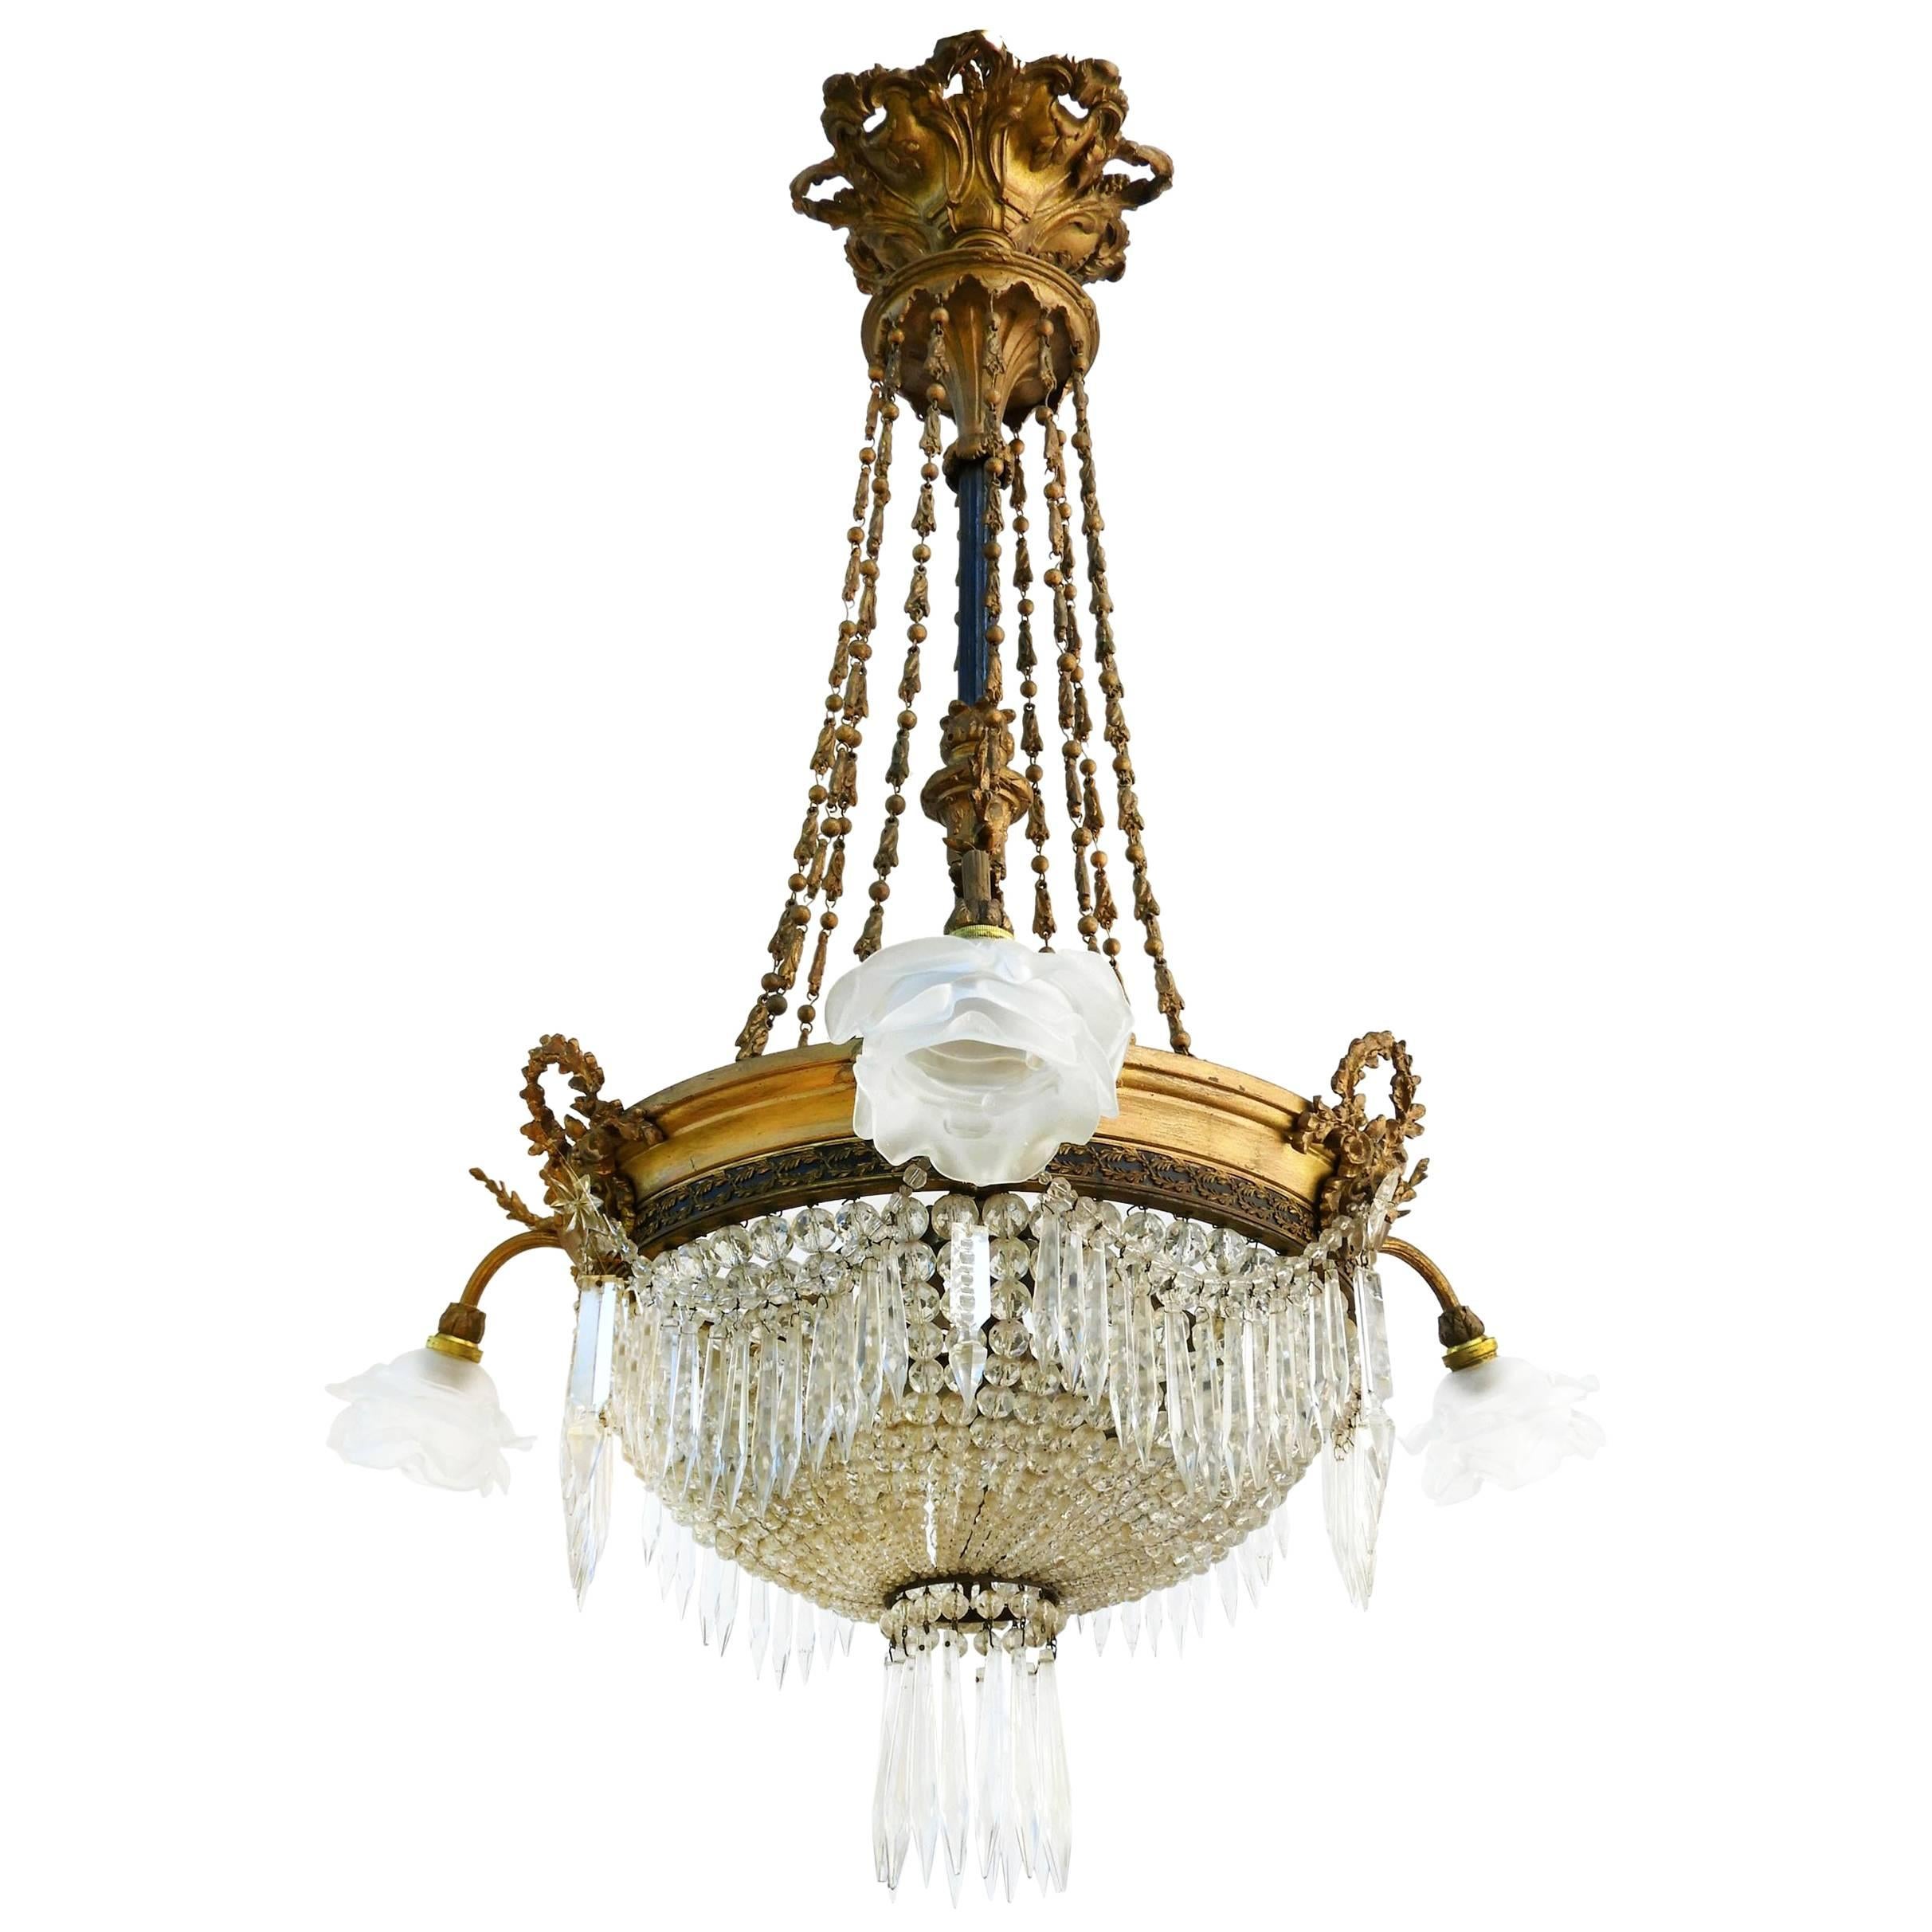 Belle Époque Chandelier French Crystal Gilt Bronze Rose Shades Late 19th Century